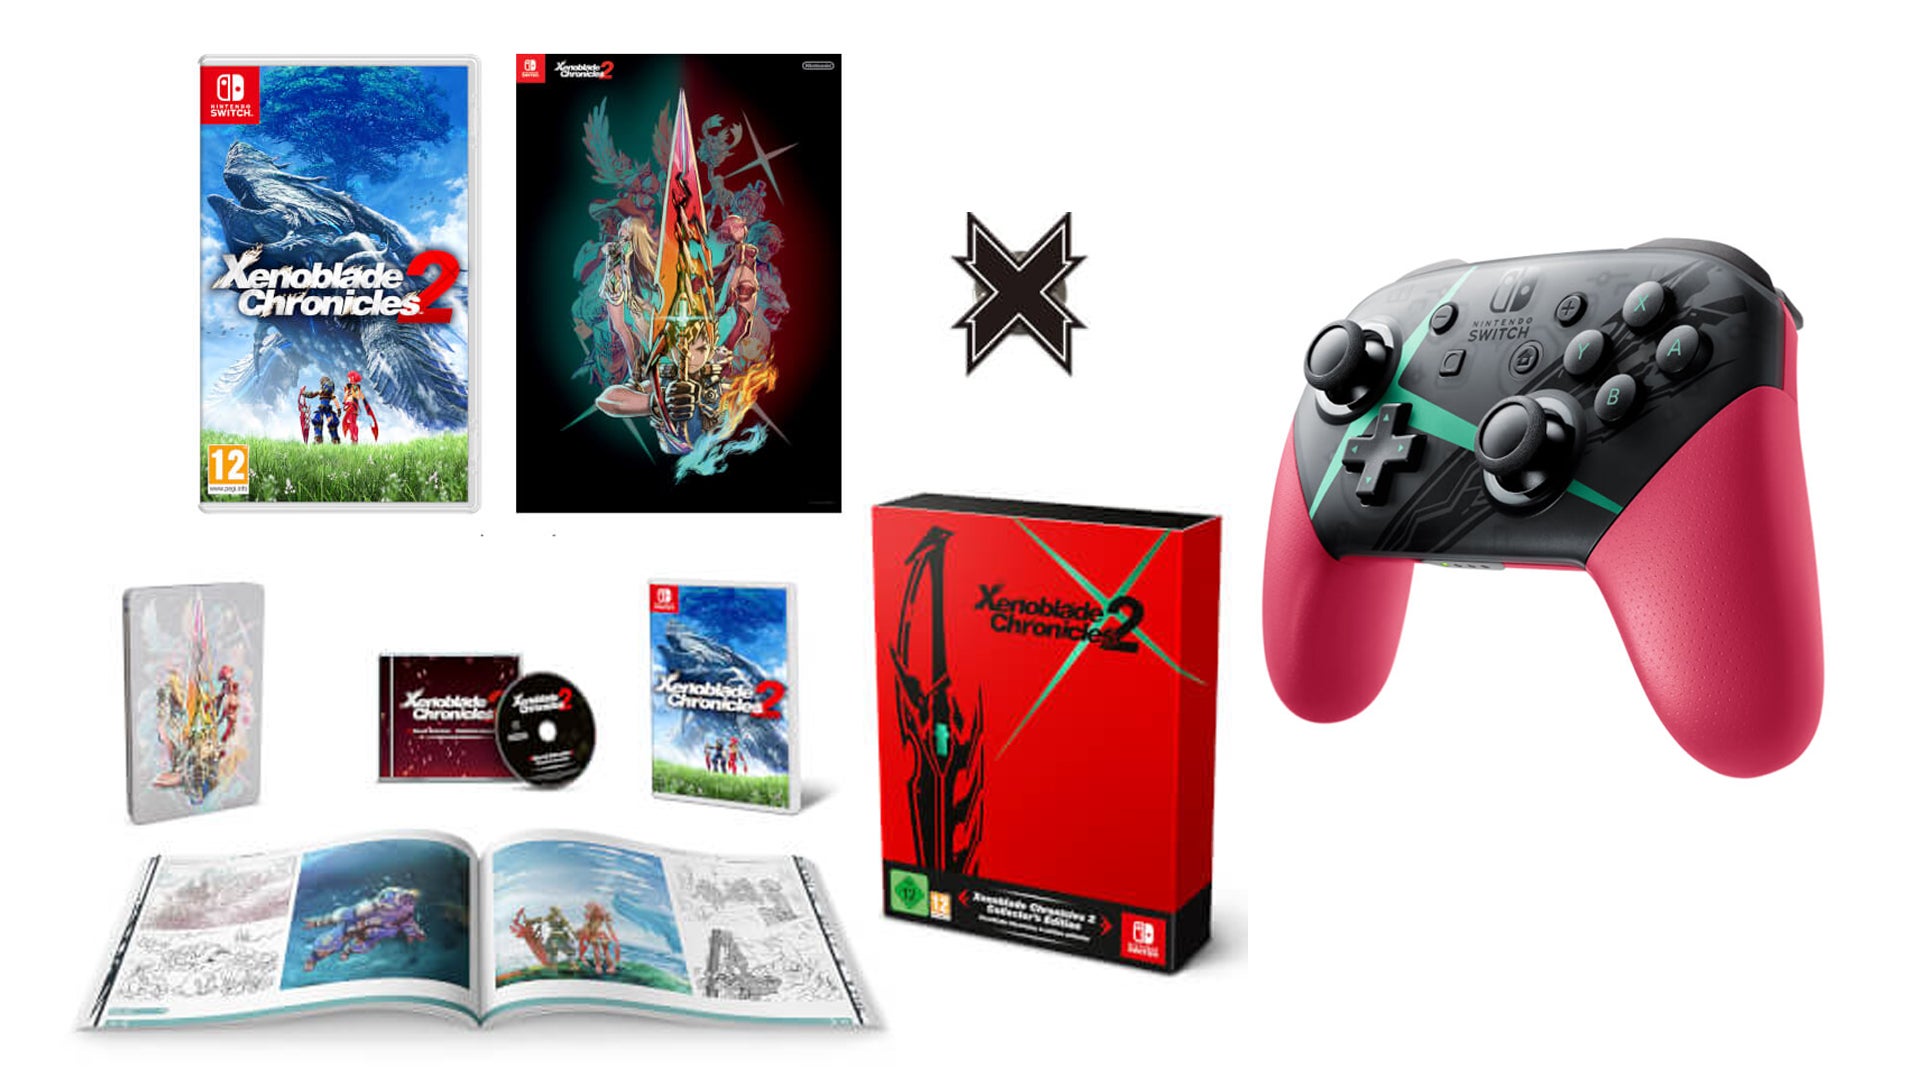 Image for Xenoblade Chronicles 2 Pro Controller and Collector's Editions up for pre-order now